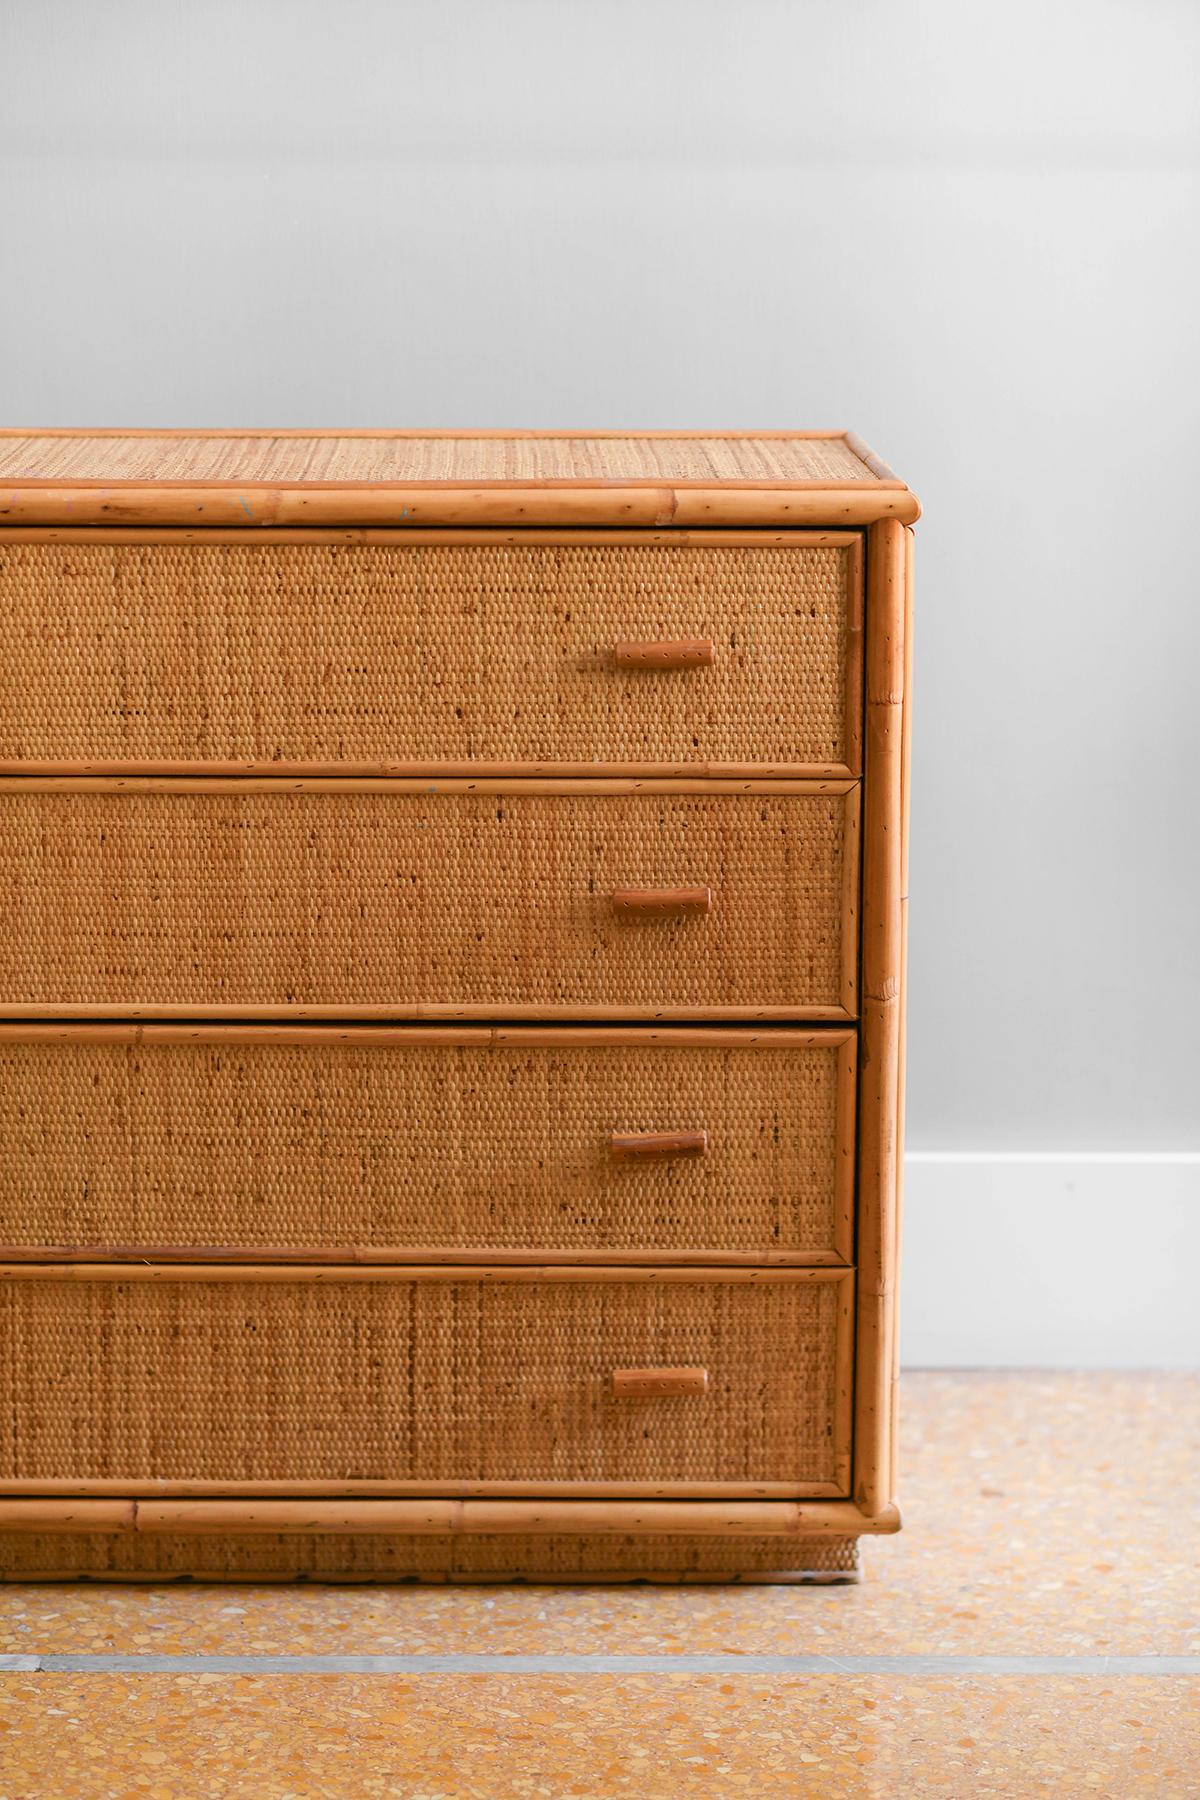 Italian Chest of drawers in bamboo and wicker, 1980.